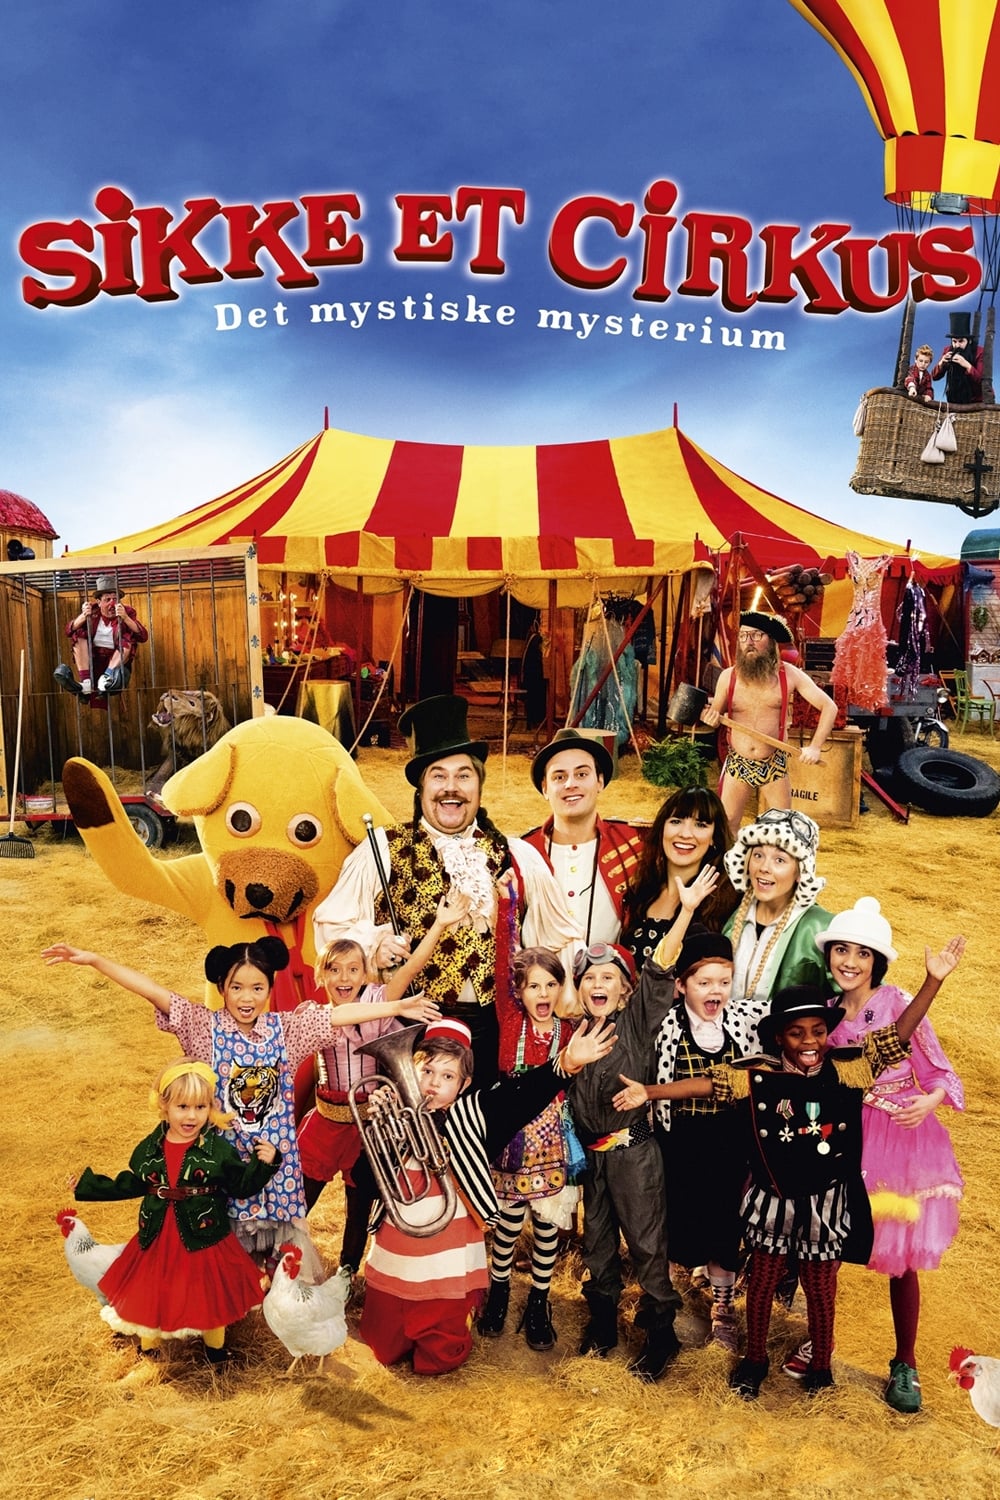 What a Circus!